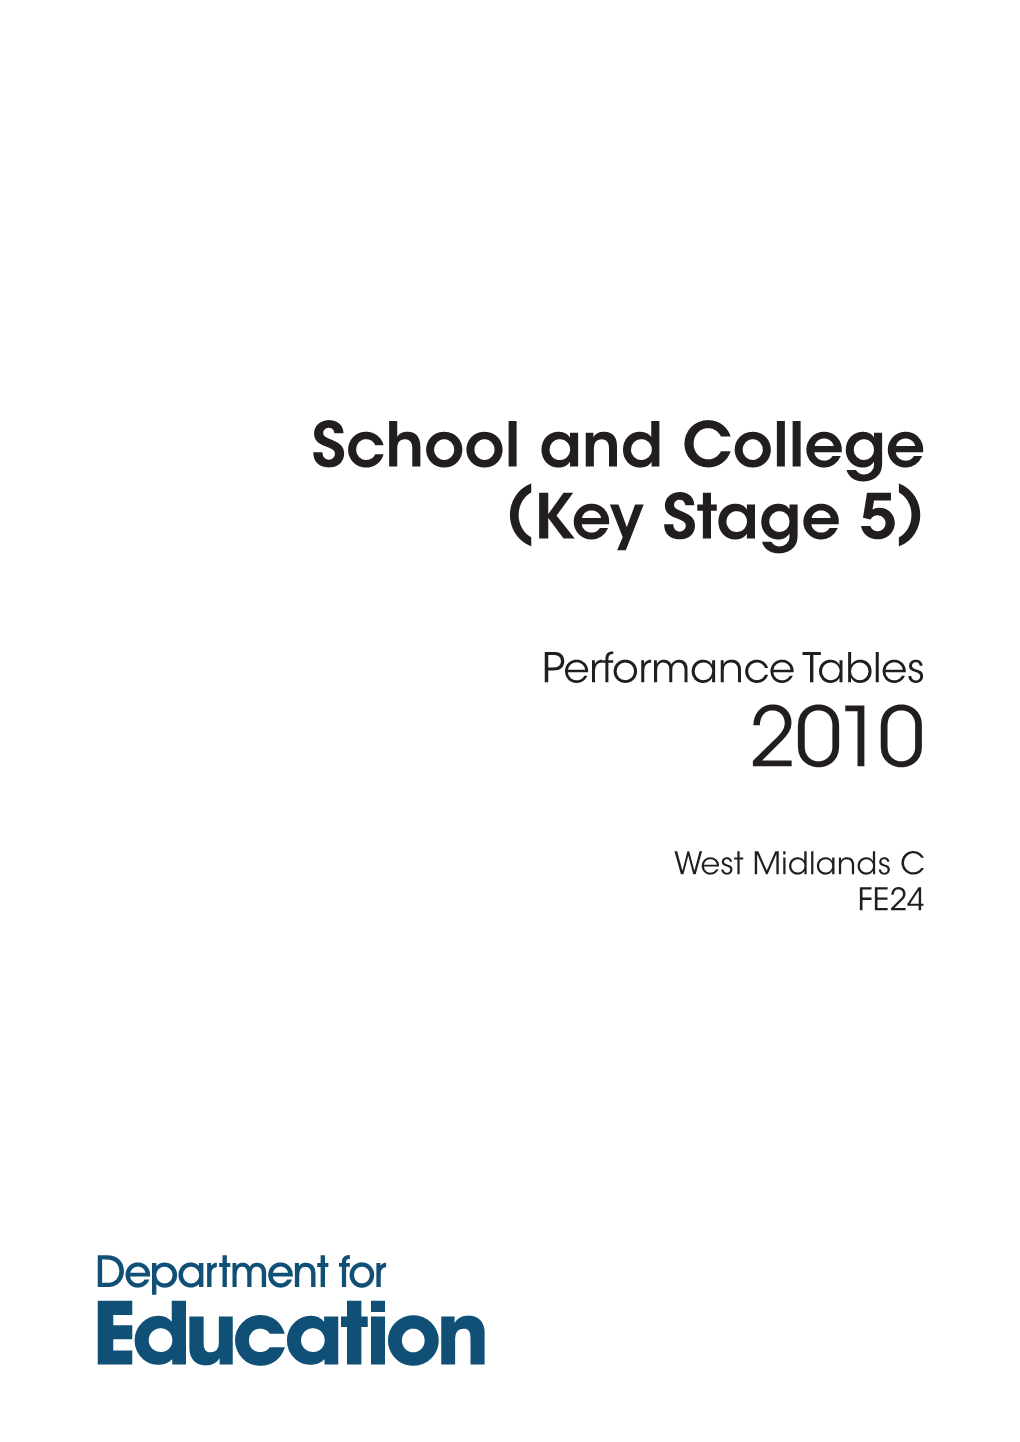 School and College (Key Stage 5)